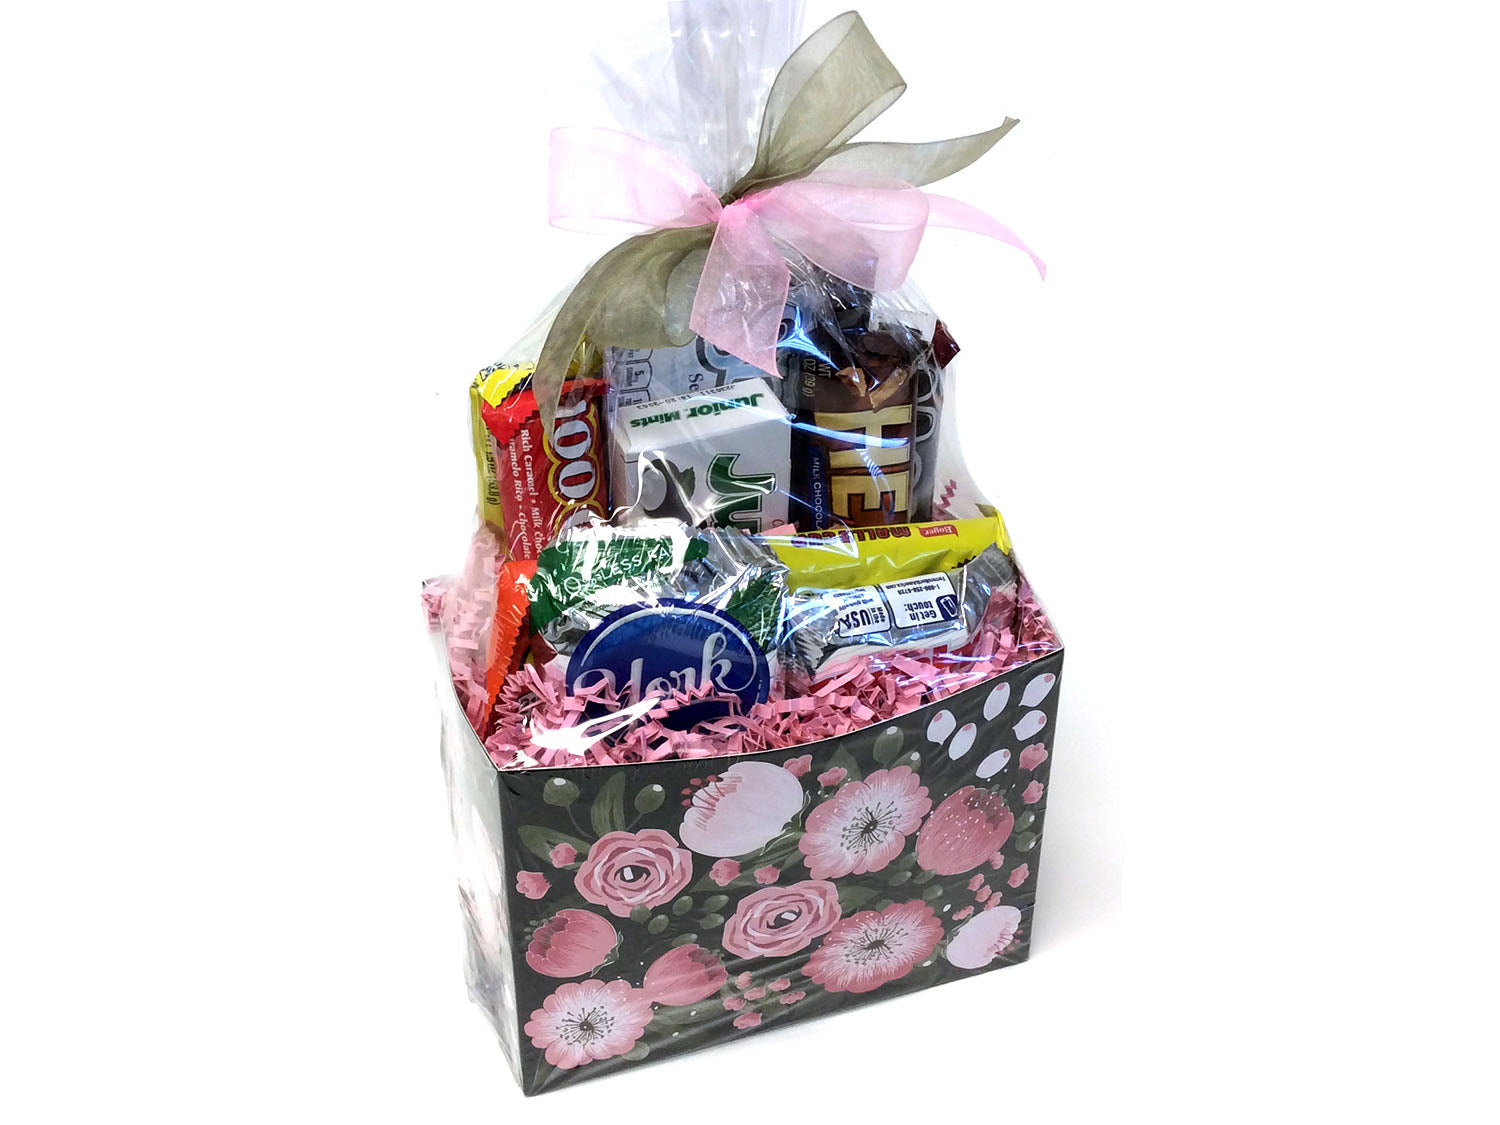 Chocolate Lover Gift Basket